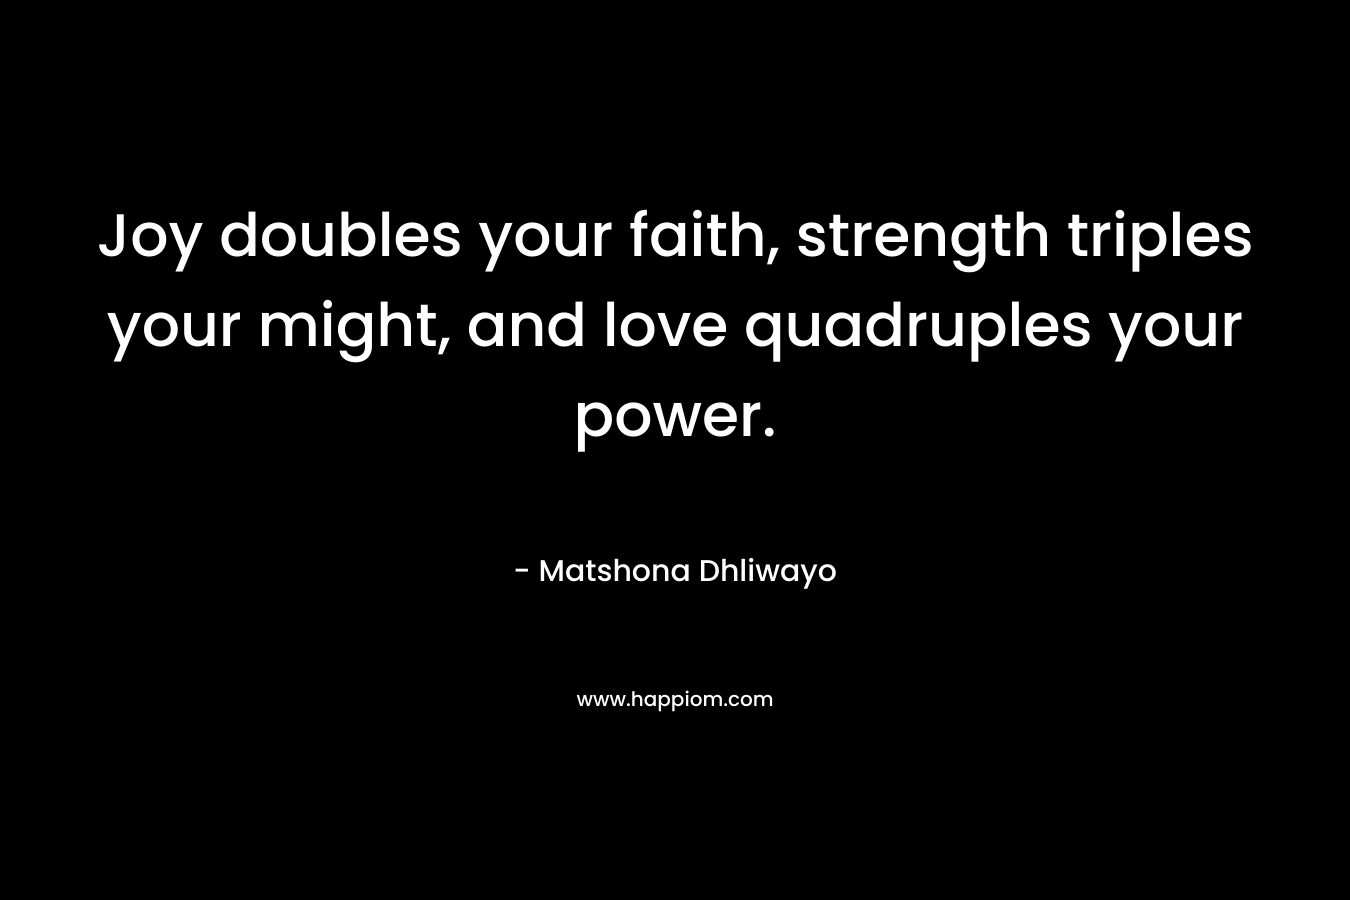 Joy doubles your faith, strength triples your might, and love quadruples your power.